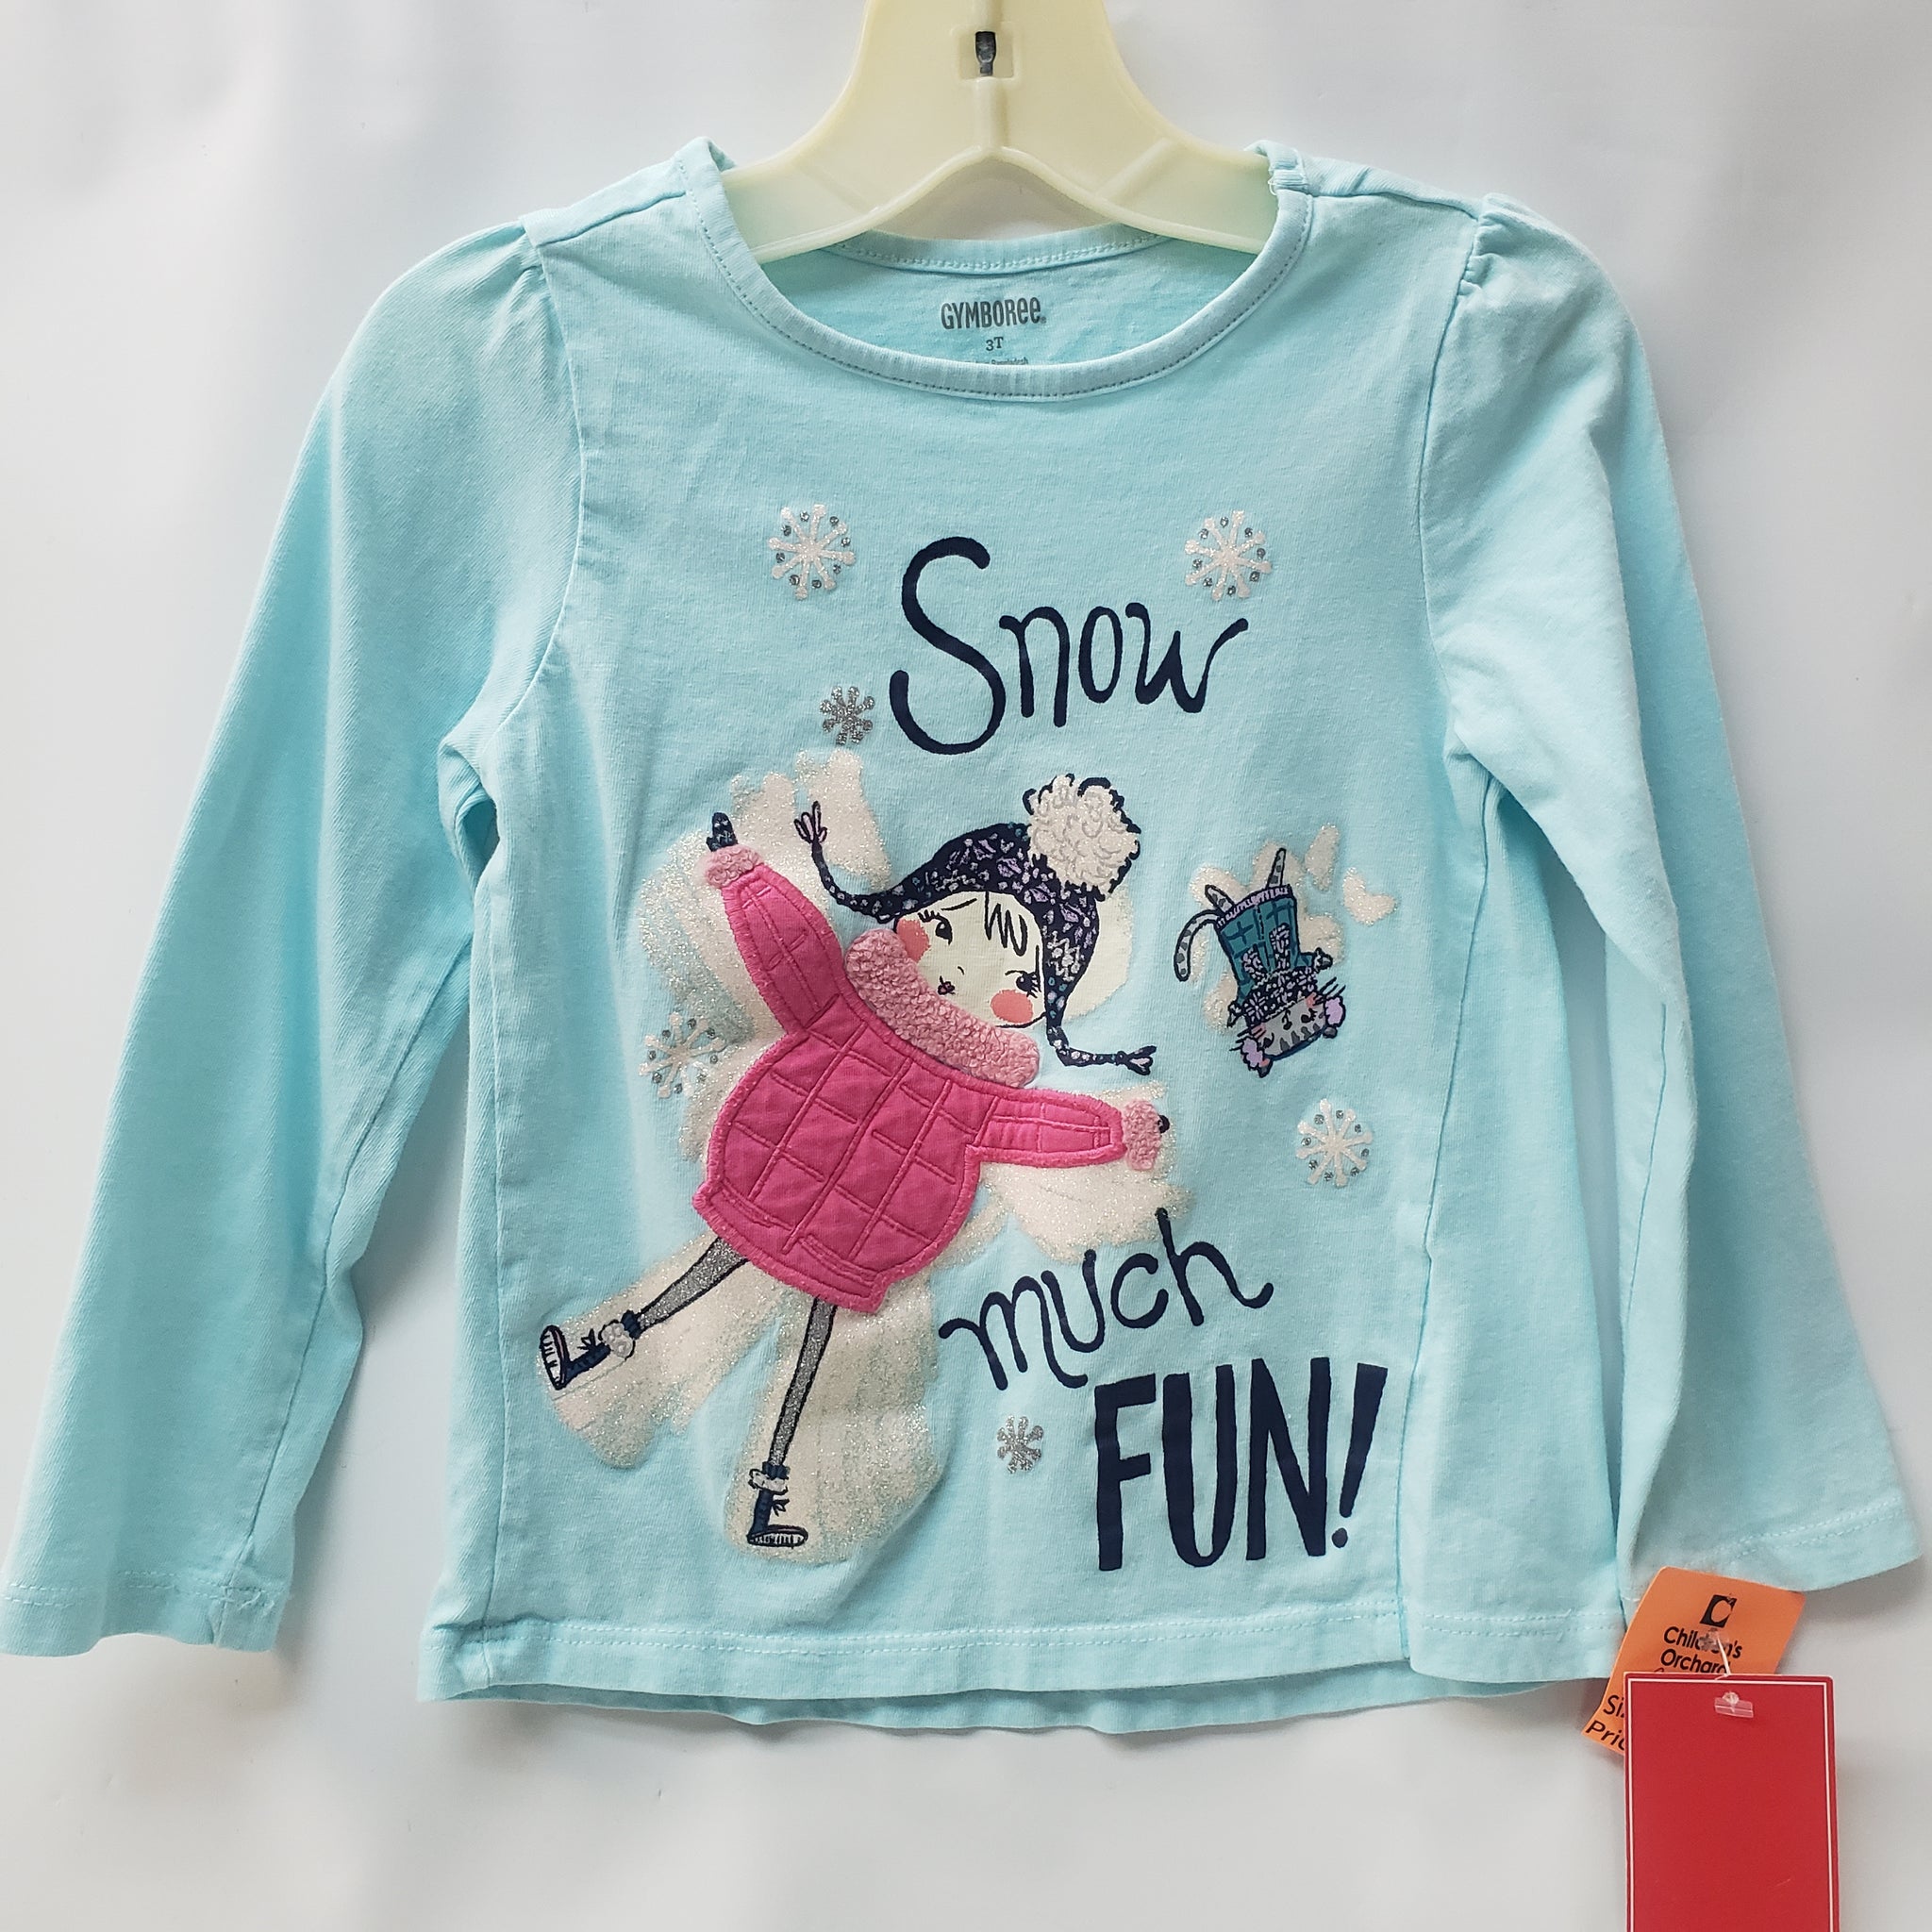 Long Sleeve  Shirt  By Gymboree Size 3T